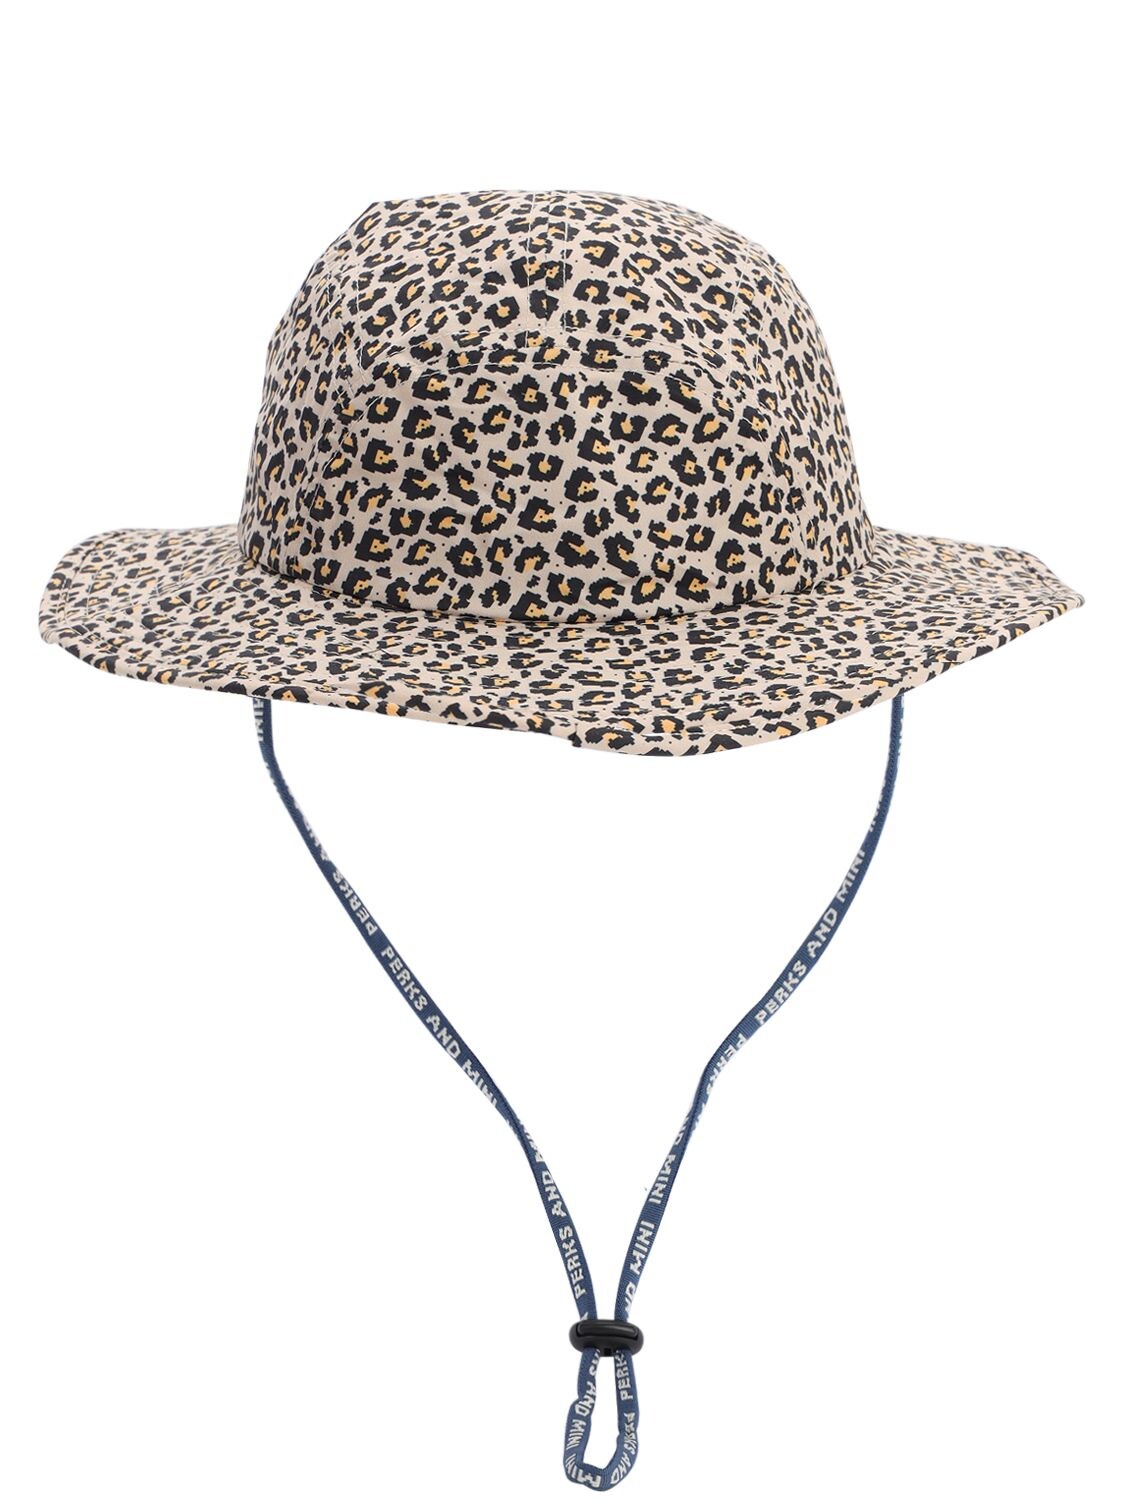 Pam - Perks And Mini Boxed Animal Sun Hat In Multicolor